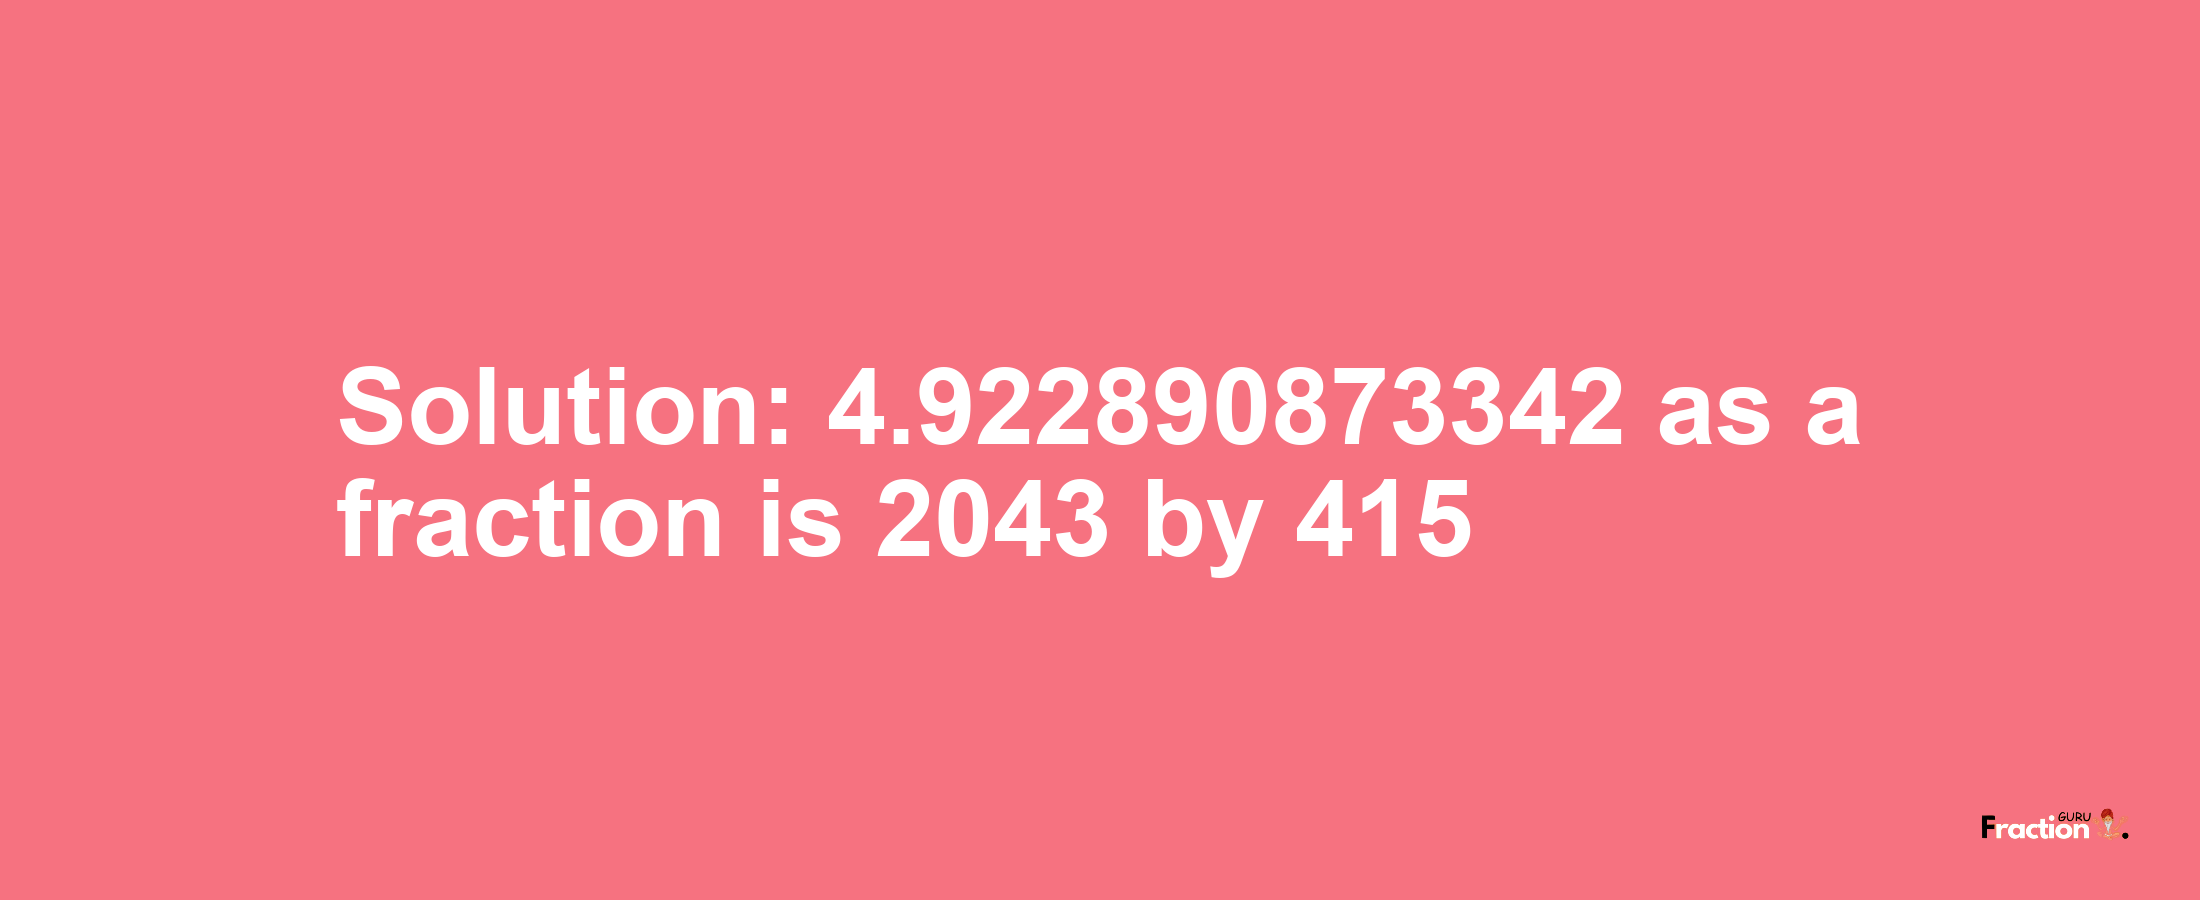 Solution:4.922890873342 as a fraction is 2043/415